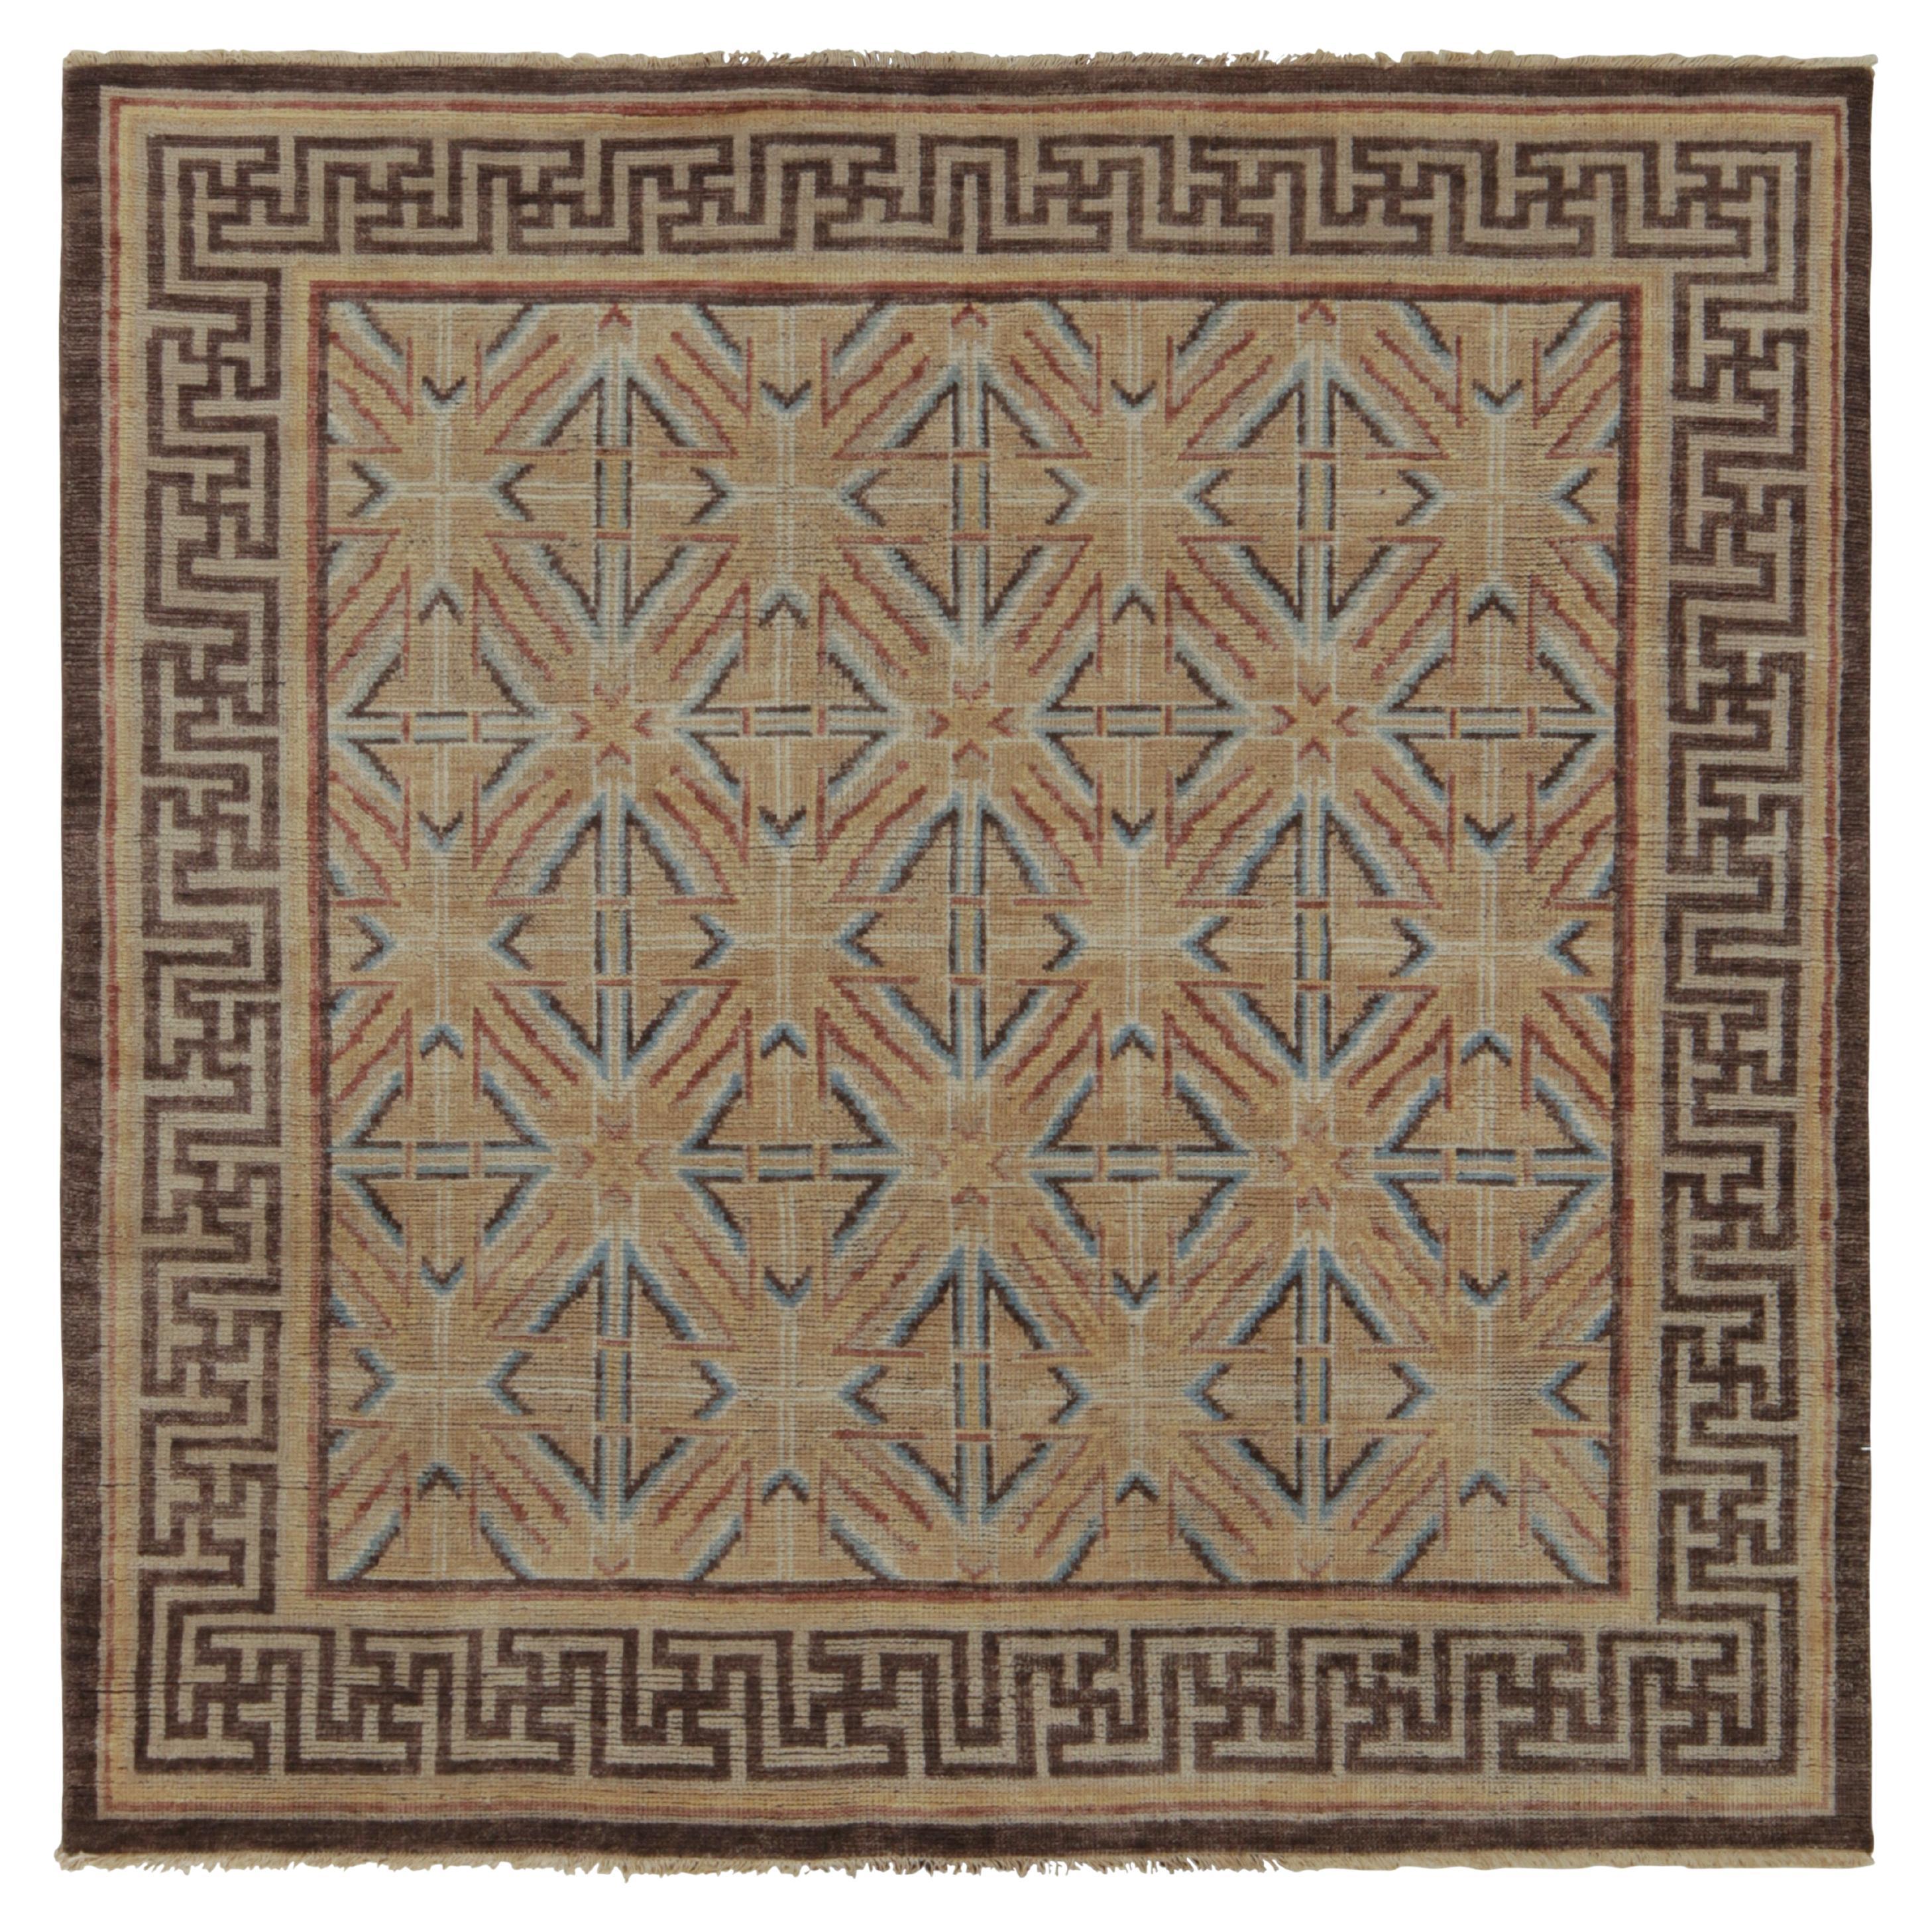 Rug & Kilim’s Chinese Dynastic Style Square Rug in Beige-Brown and Blue Patterns For Sale